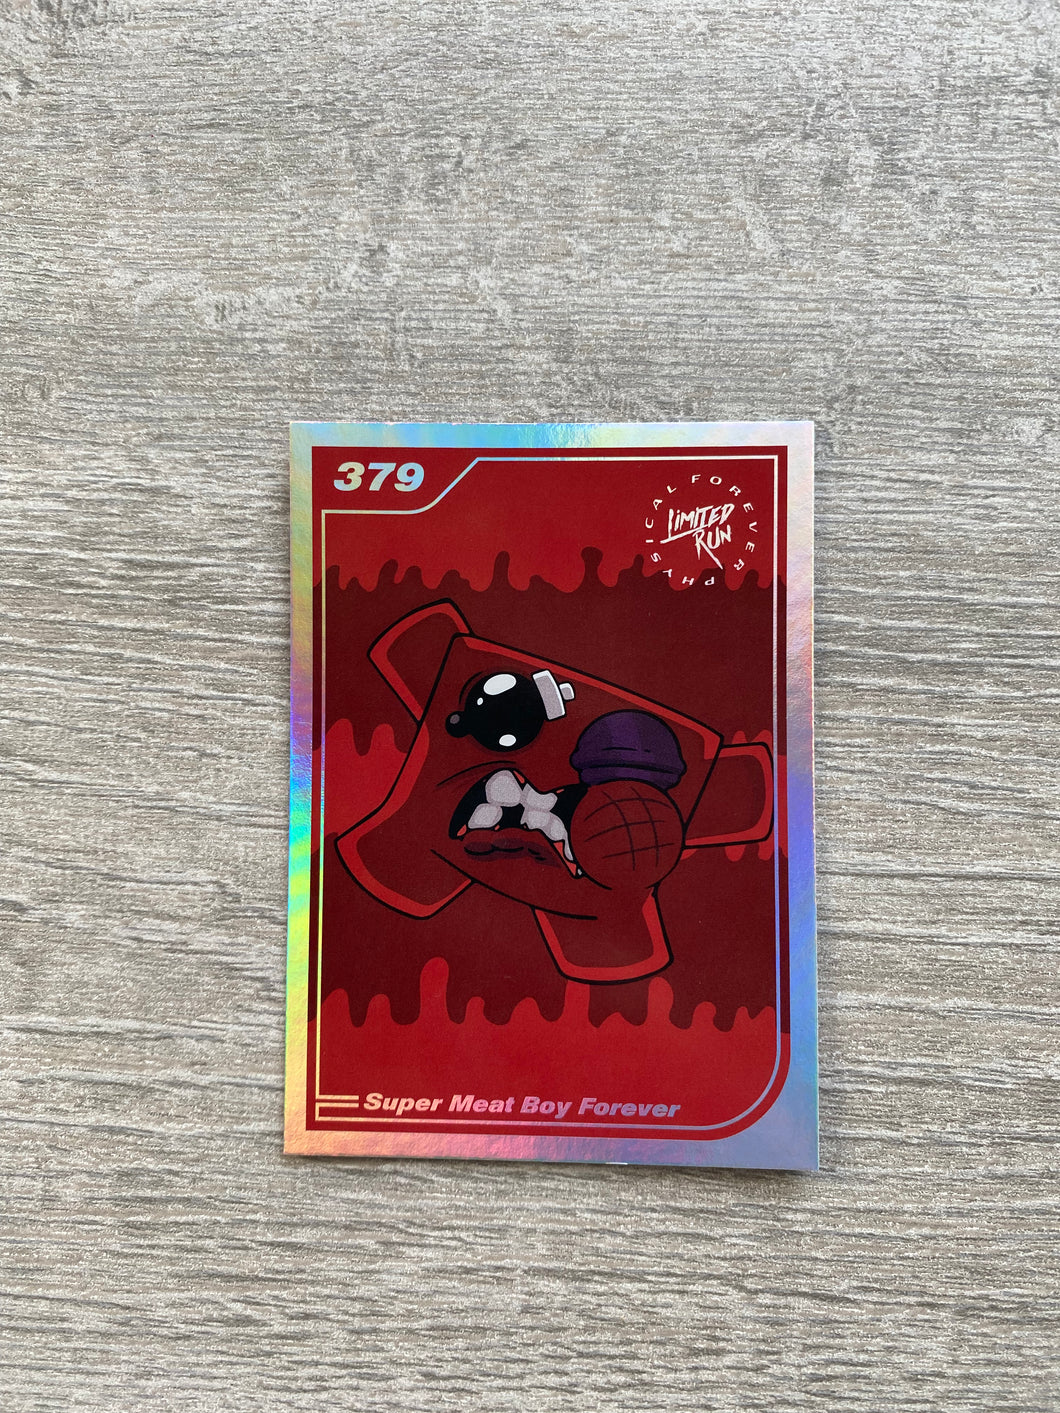 Gen2 #379 Silver Super meat boy forever Limited run games Trading card